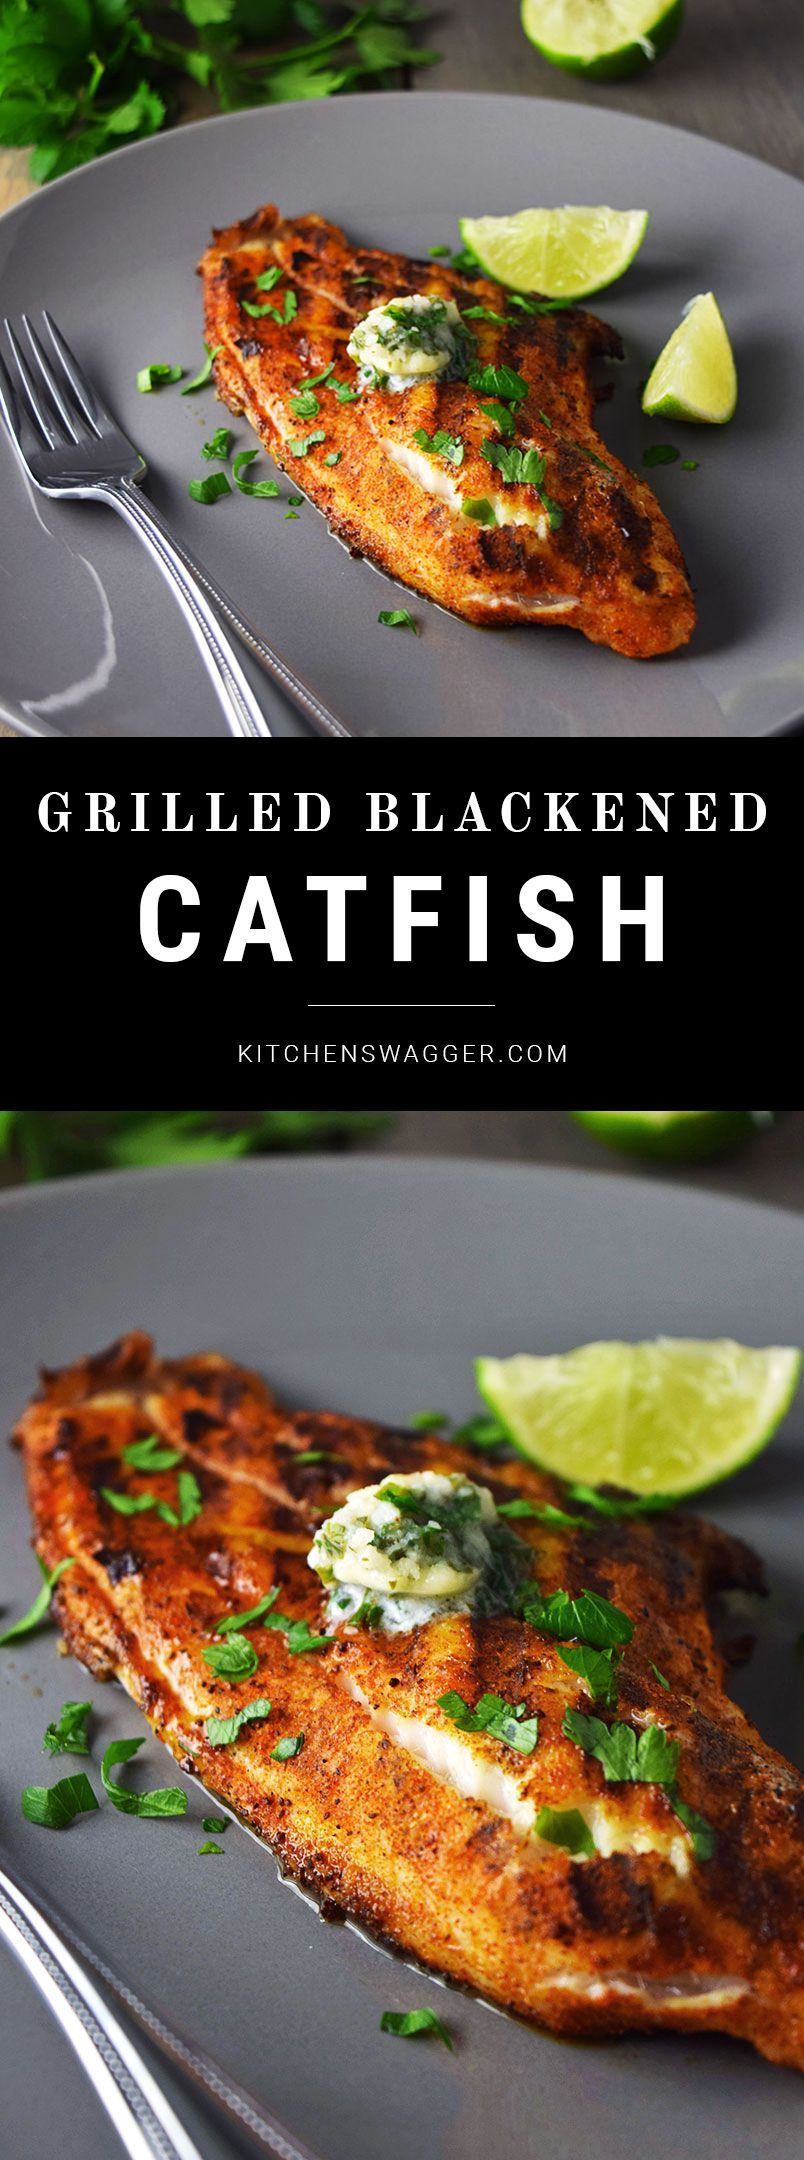 Grilled blackened catfish topped with a cilantro, lime, and garlic compound butter. -   22 summer fish recipes
 ideas